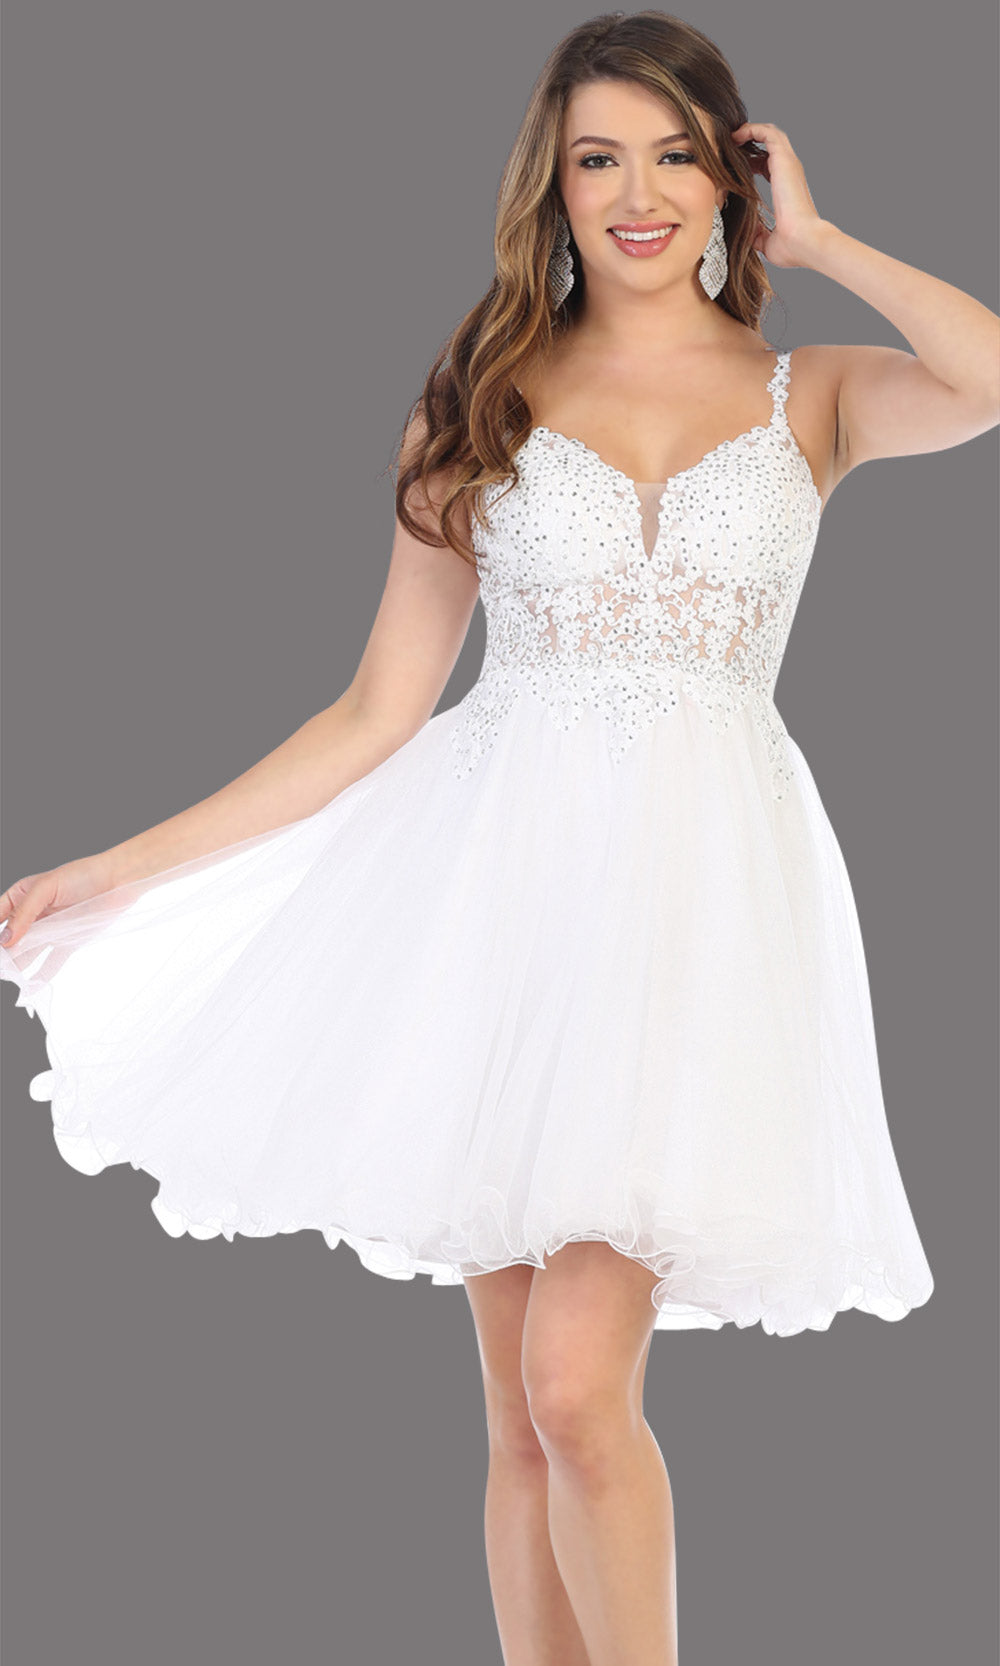 Mayqueen Mq1693 short white flowy v neck beaded sequin grade 8 graduation dress w/straps & puffy skirt. This white party dress is perfect for prom, graduation, grade 8 grad, confirmation dress, bat mitzvah dress, damas. Plus sizes avail.jpg